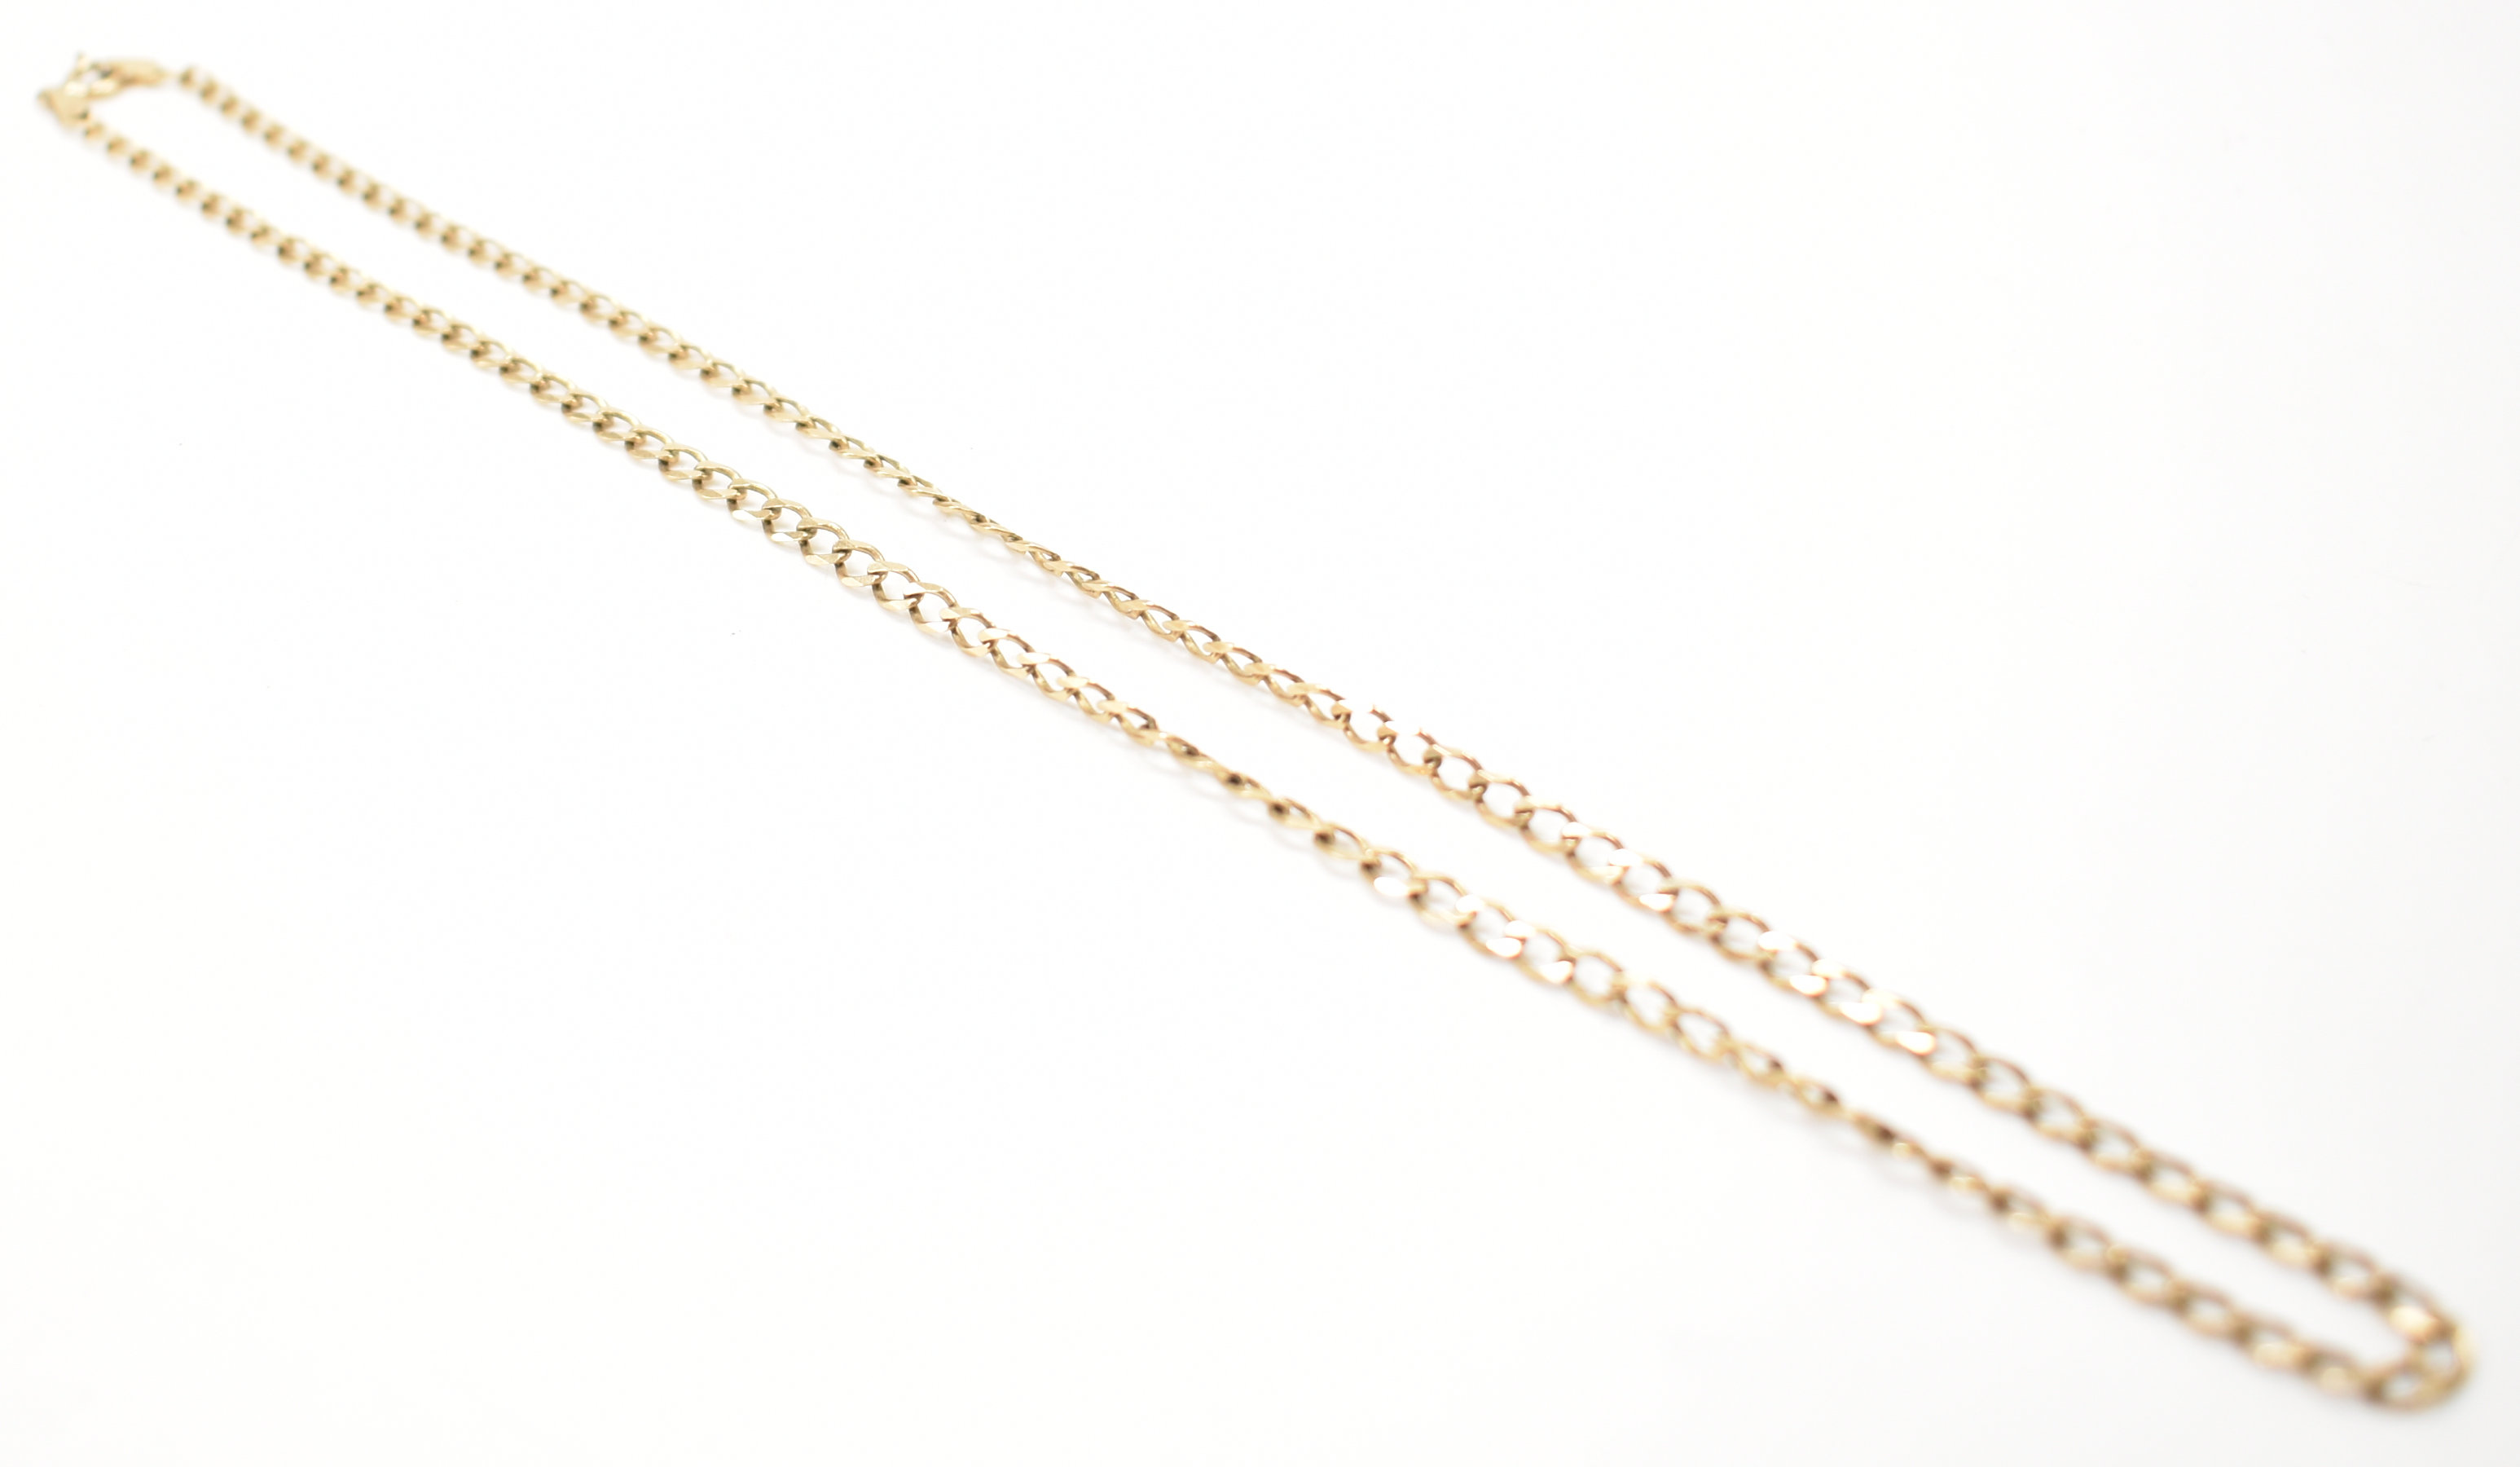 HALLMARKED 9CT GOLD FLAT LINK NECKLACE CHAIN - Image 3 of 6